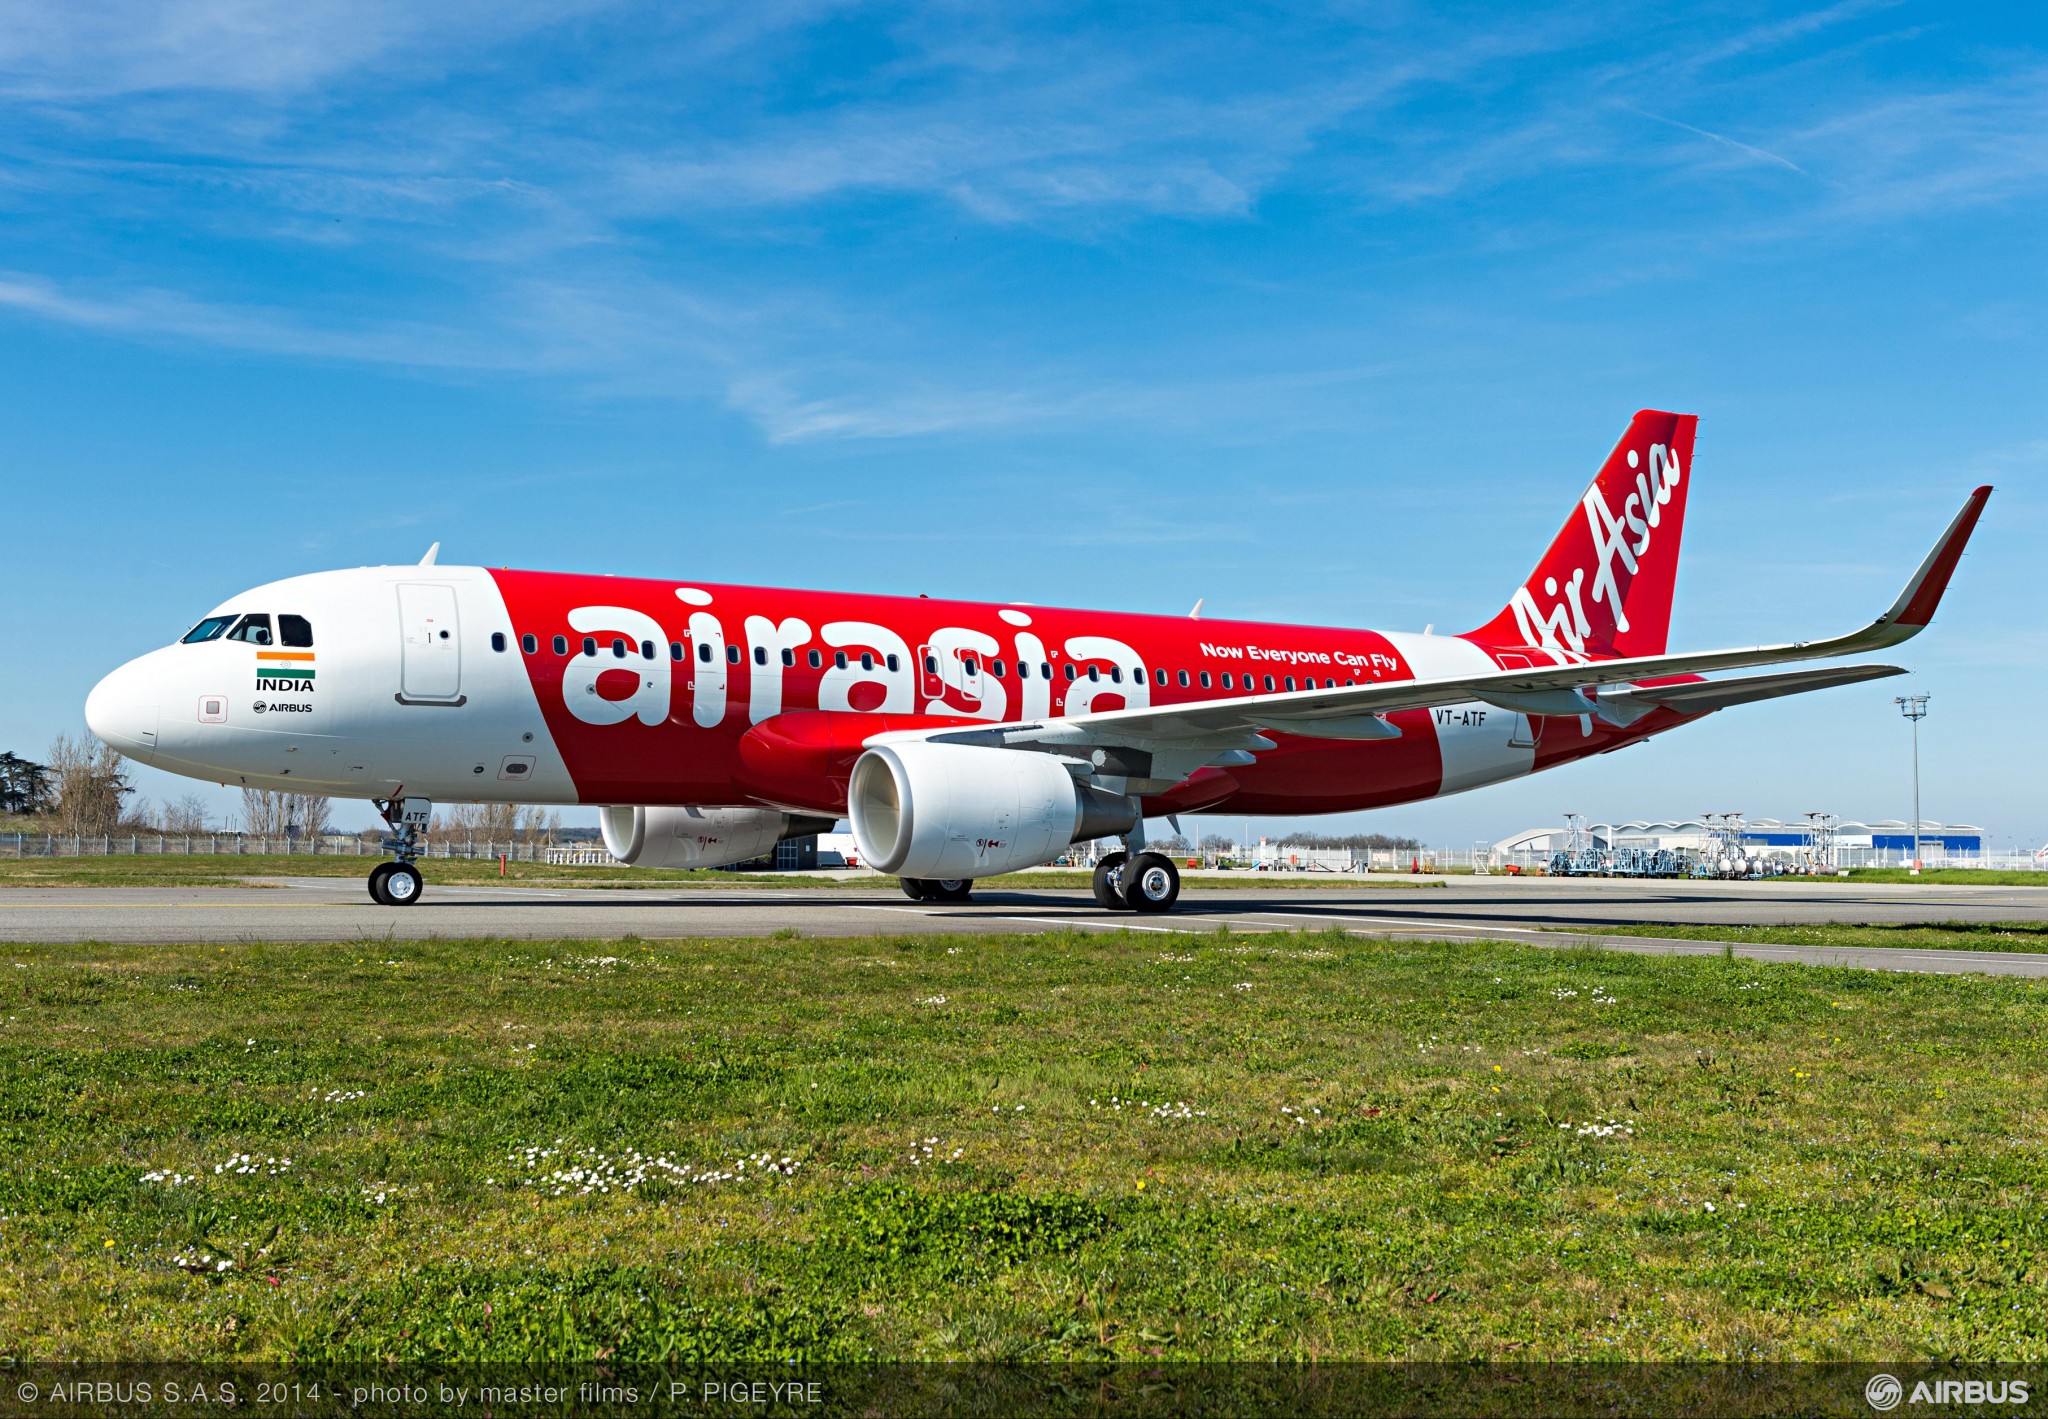 FLY Leasing and partners snap up AirAsia’s leasing assets